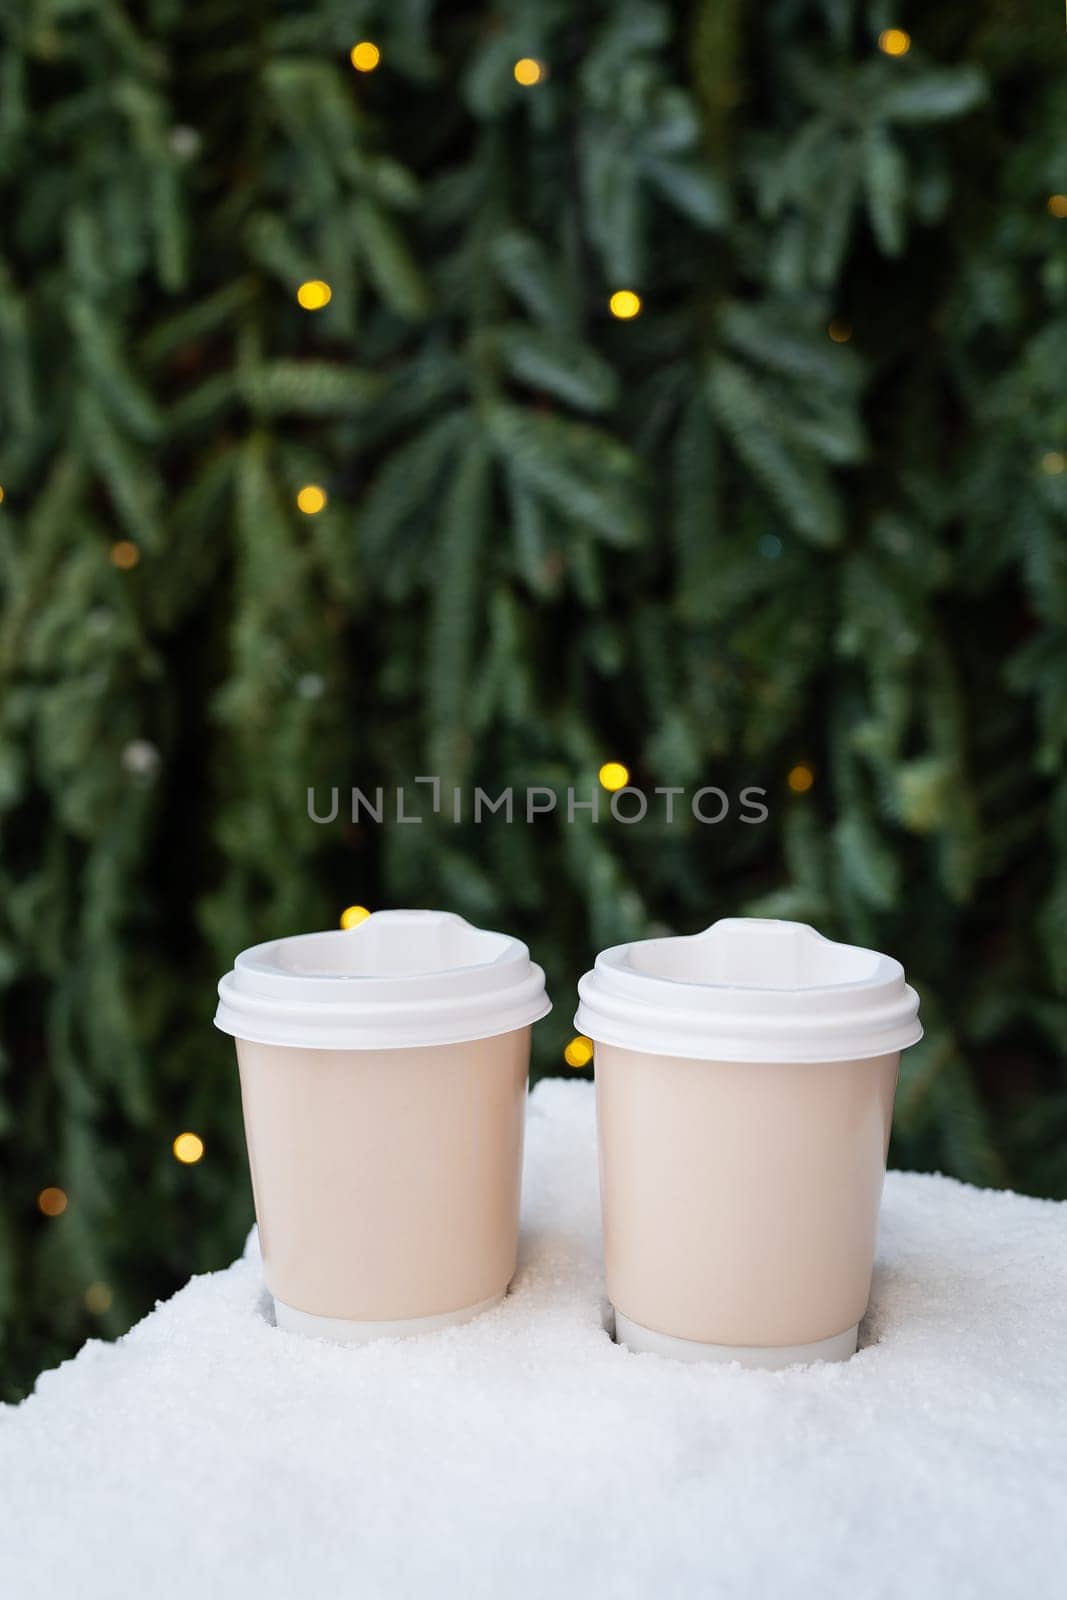 Two paper coffee cups on a snowy surface, with a Christmas tree with lights in the background